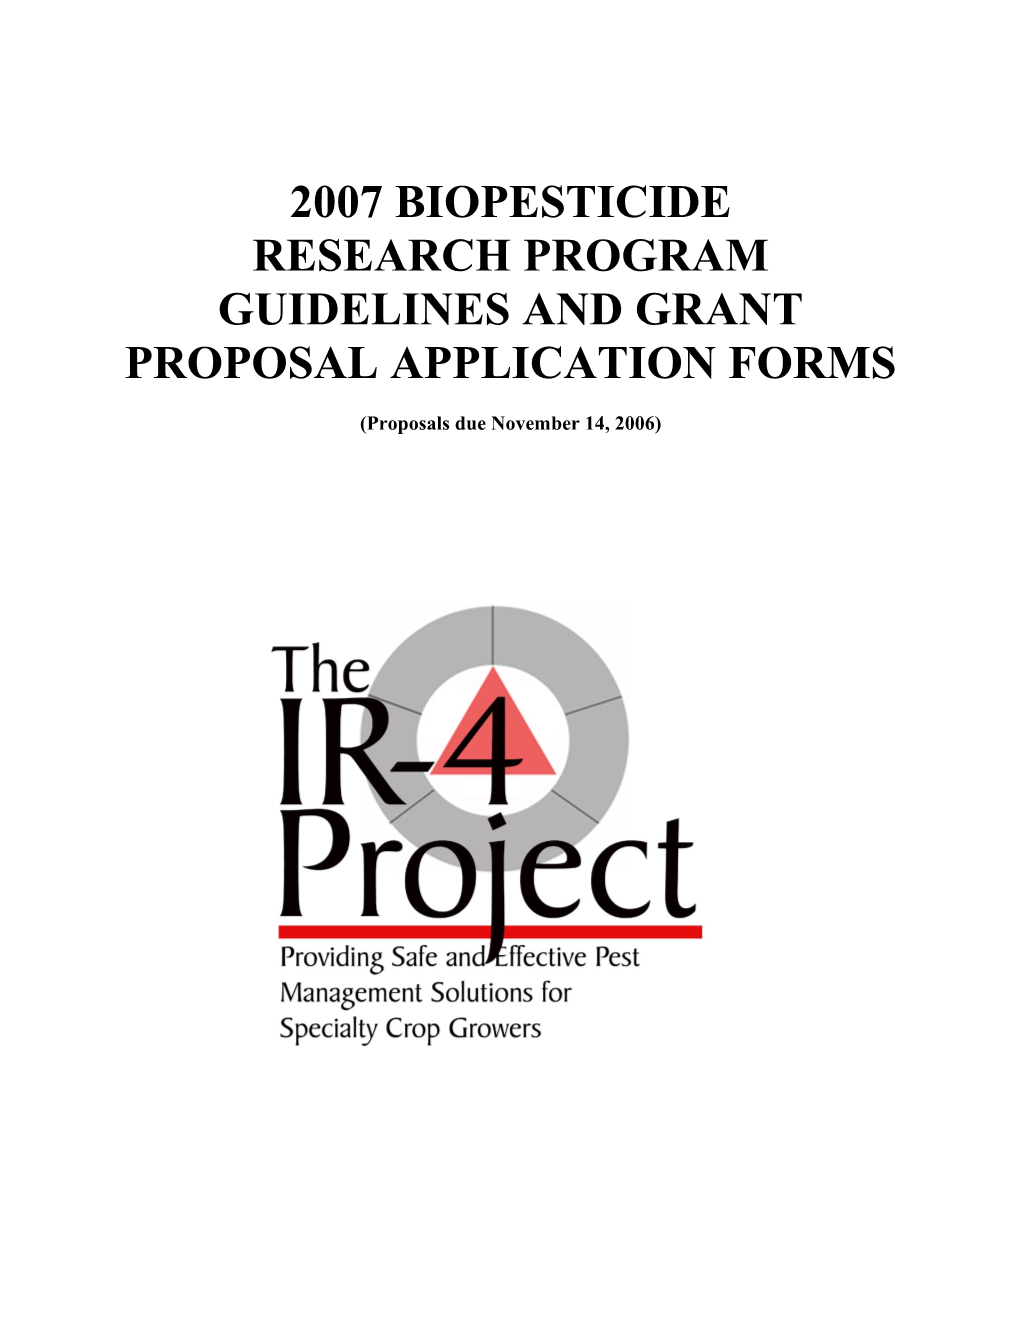 Guidelines and Grant Proposal Application Forms